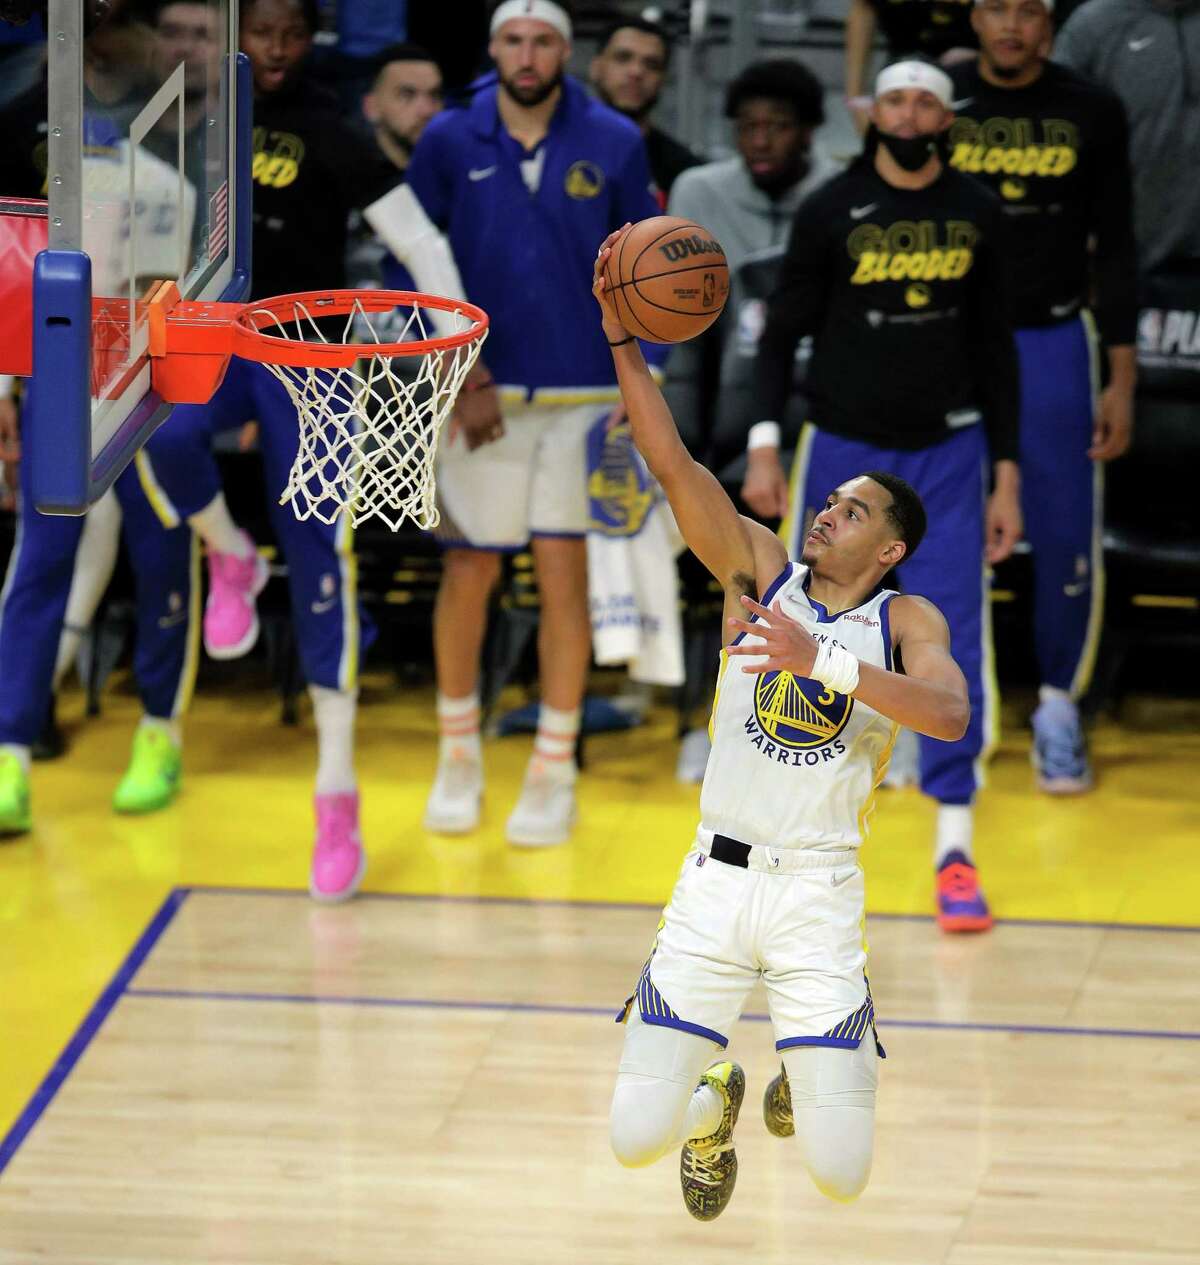 Jordan Poole (3) takes the ball to the basket for a layup after a steal in the second quarter as the Golden State Warriors played the Denver Nuggets in game 2 of the NBA Playoffs first round at Chase Center in San Francisco, Calif., on Monday, April 18, 2022.